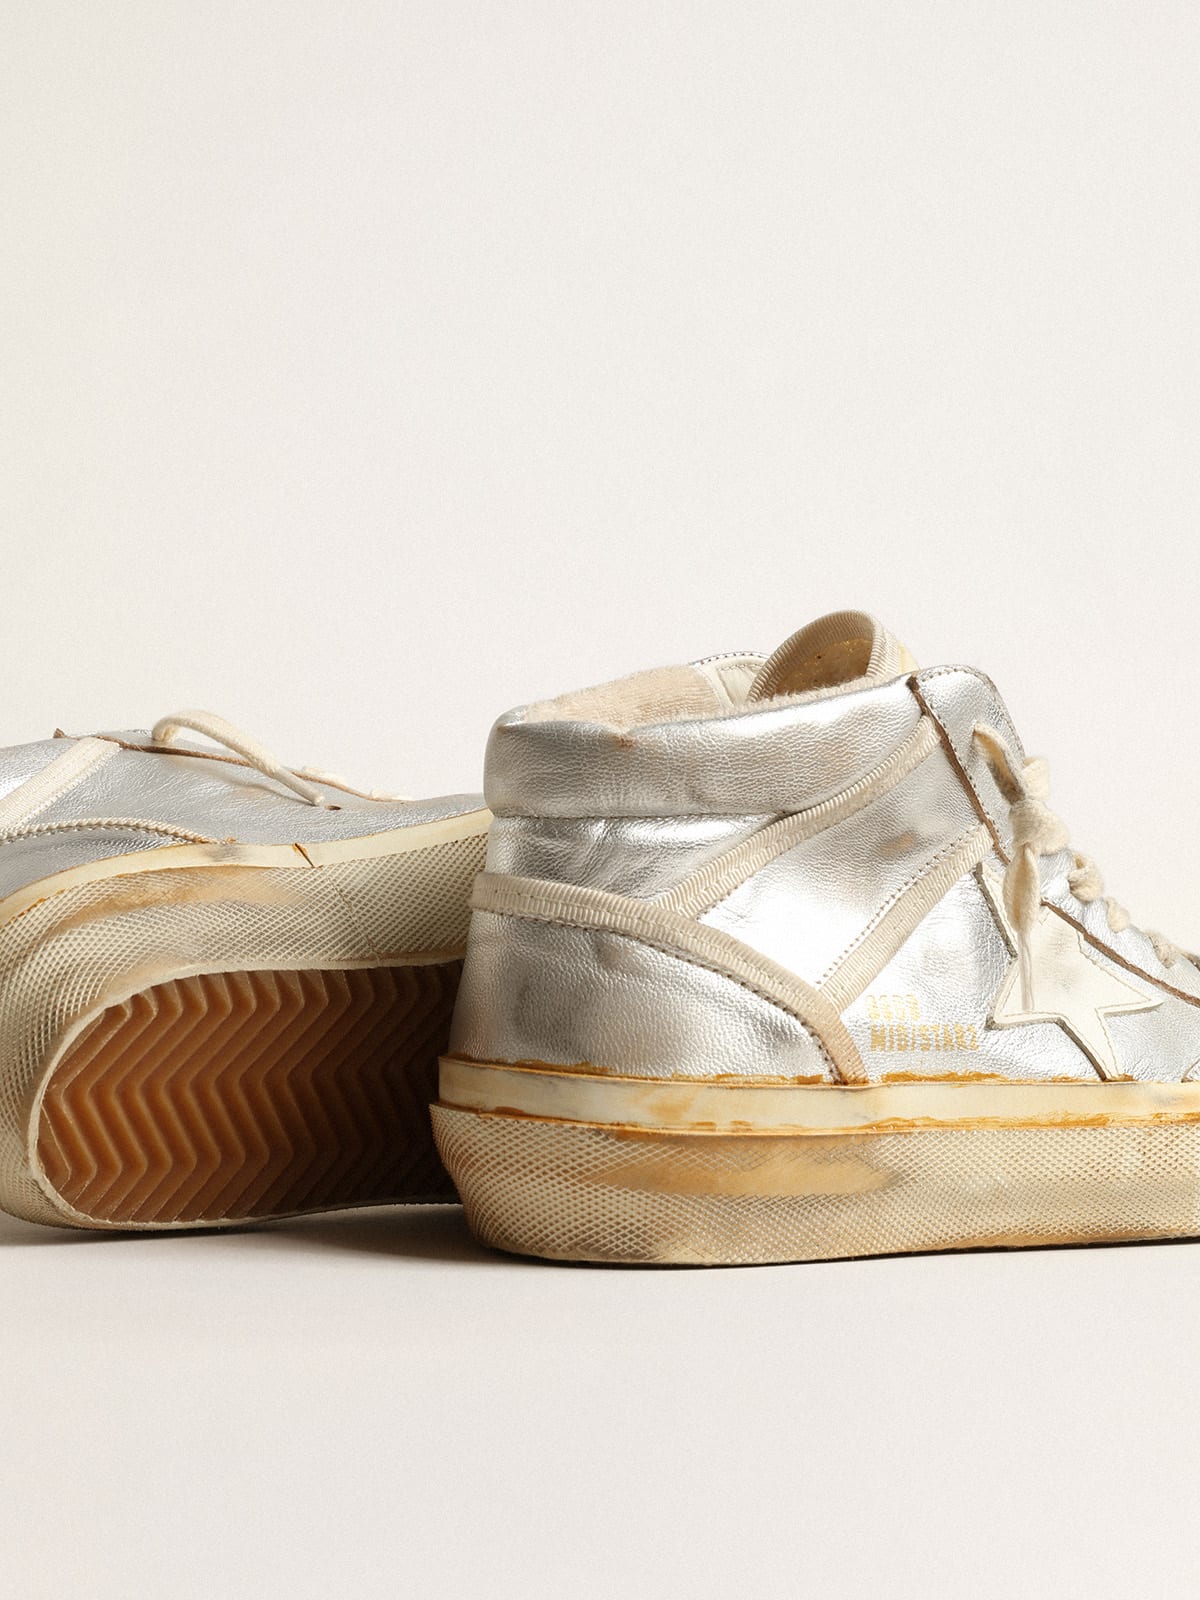 Golden Goose - Women’s Mid Star in silver metallic leather with ivory star in 